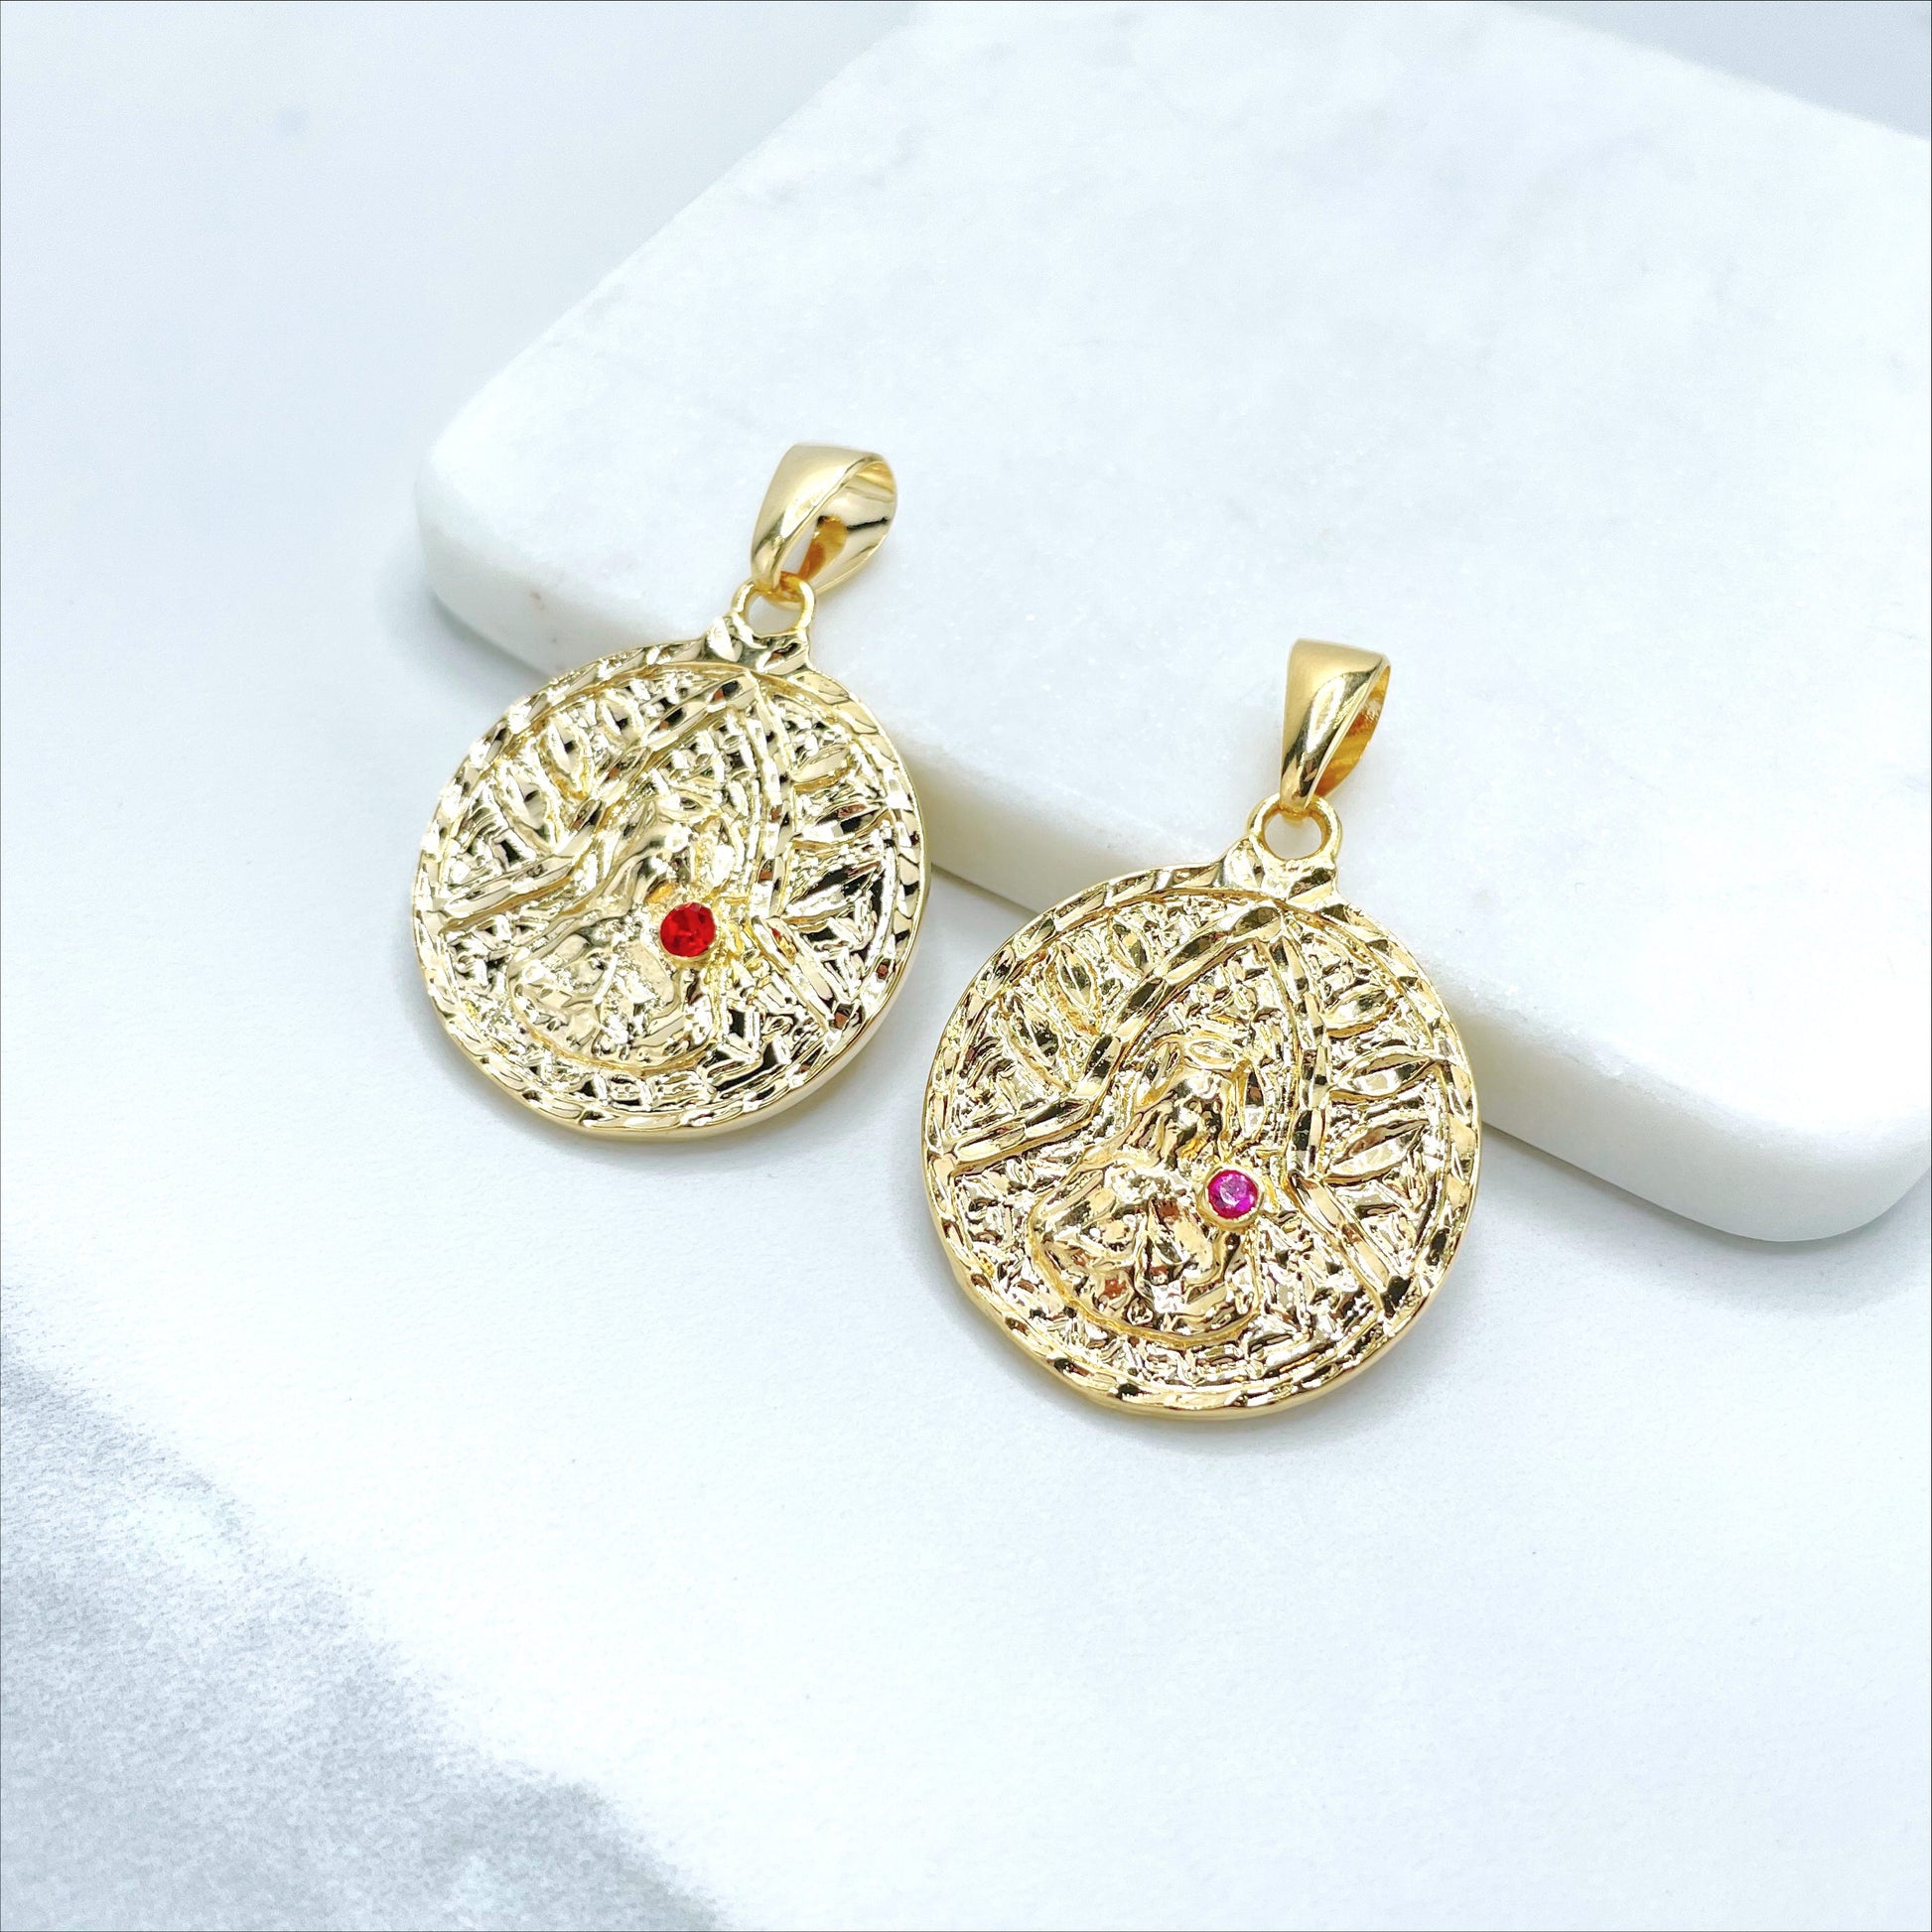 18k Gold Filled Santa Barbara with Red or Pink Cubic Zirconia, Texturized Charm Pendant, Wholesale Jewelry Making Supplies